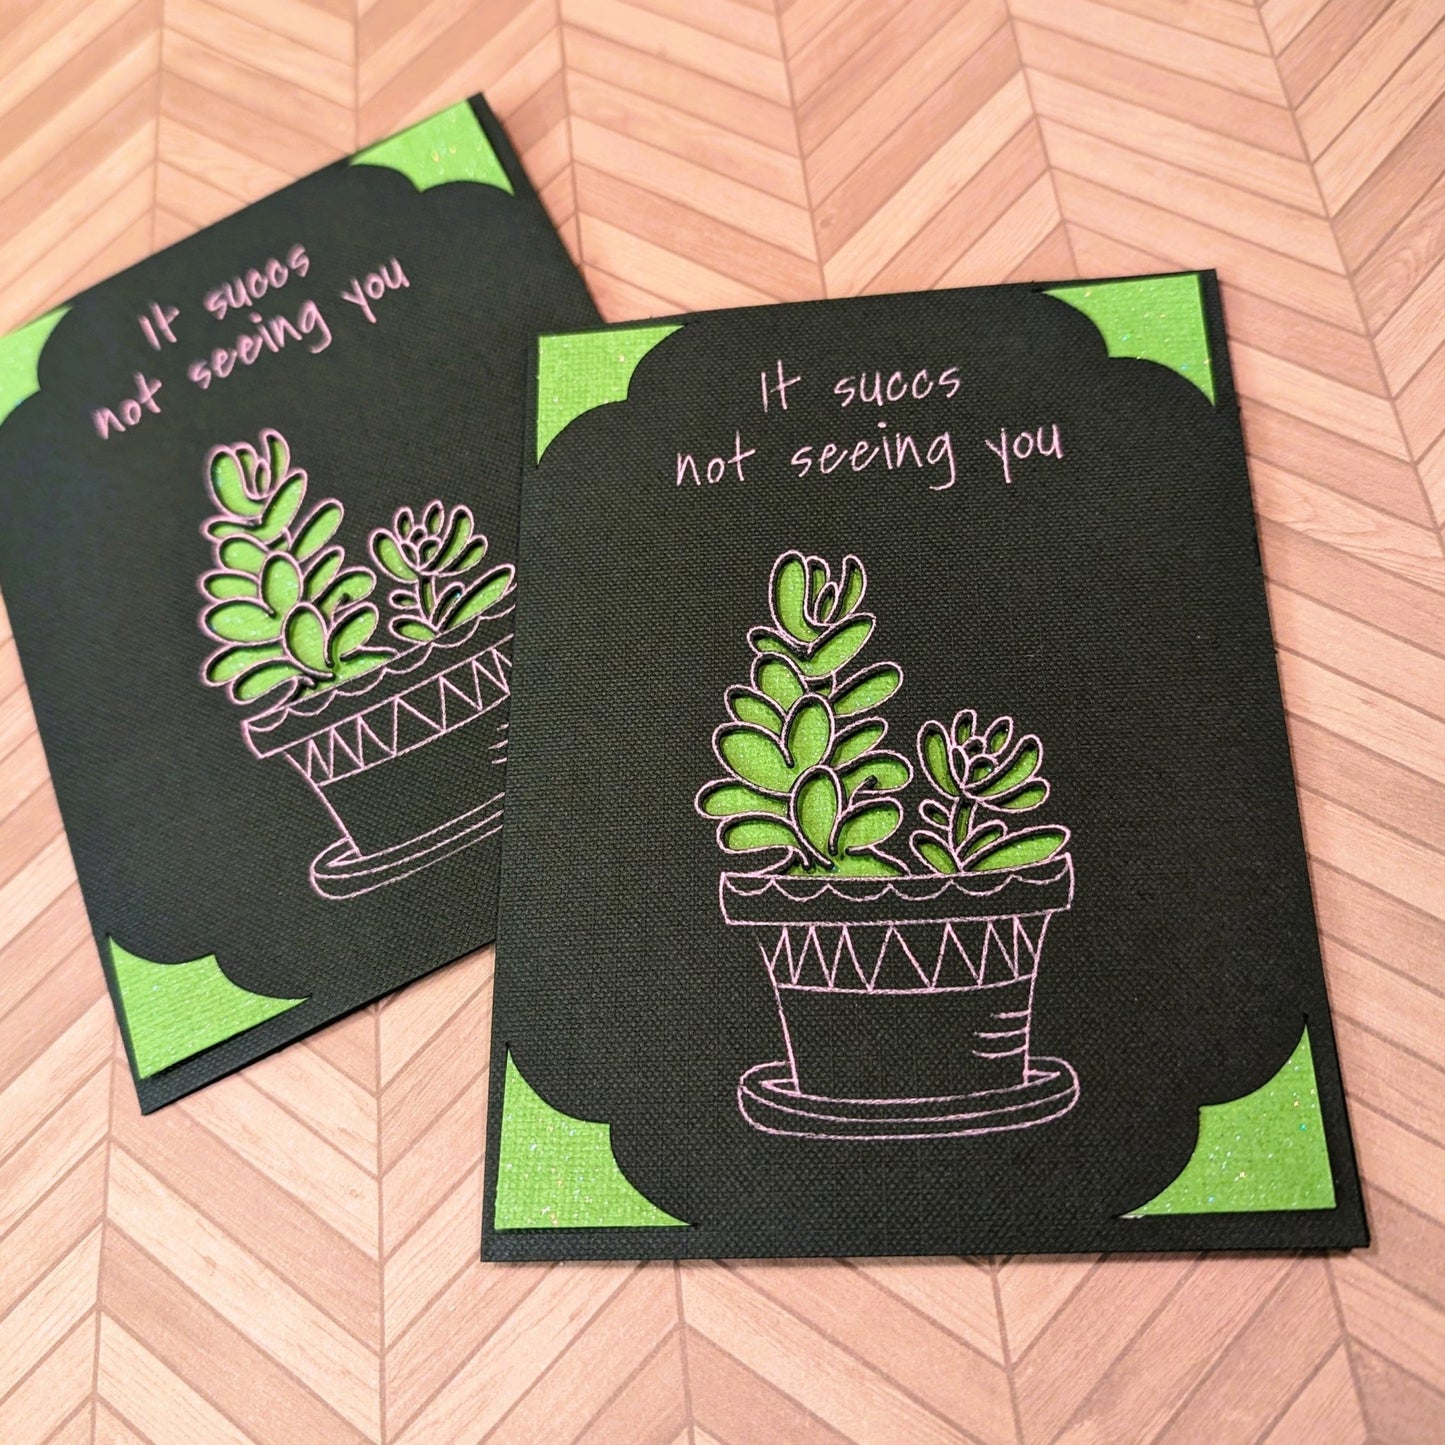 Miss Your Face, Succulents - Say Hello Collection - Handmade Greeting Card - 31 Rubies Designs